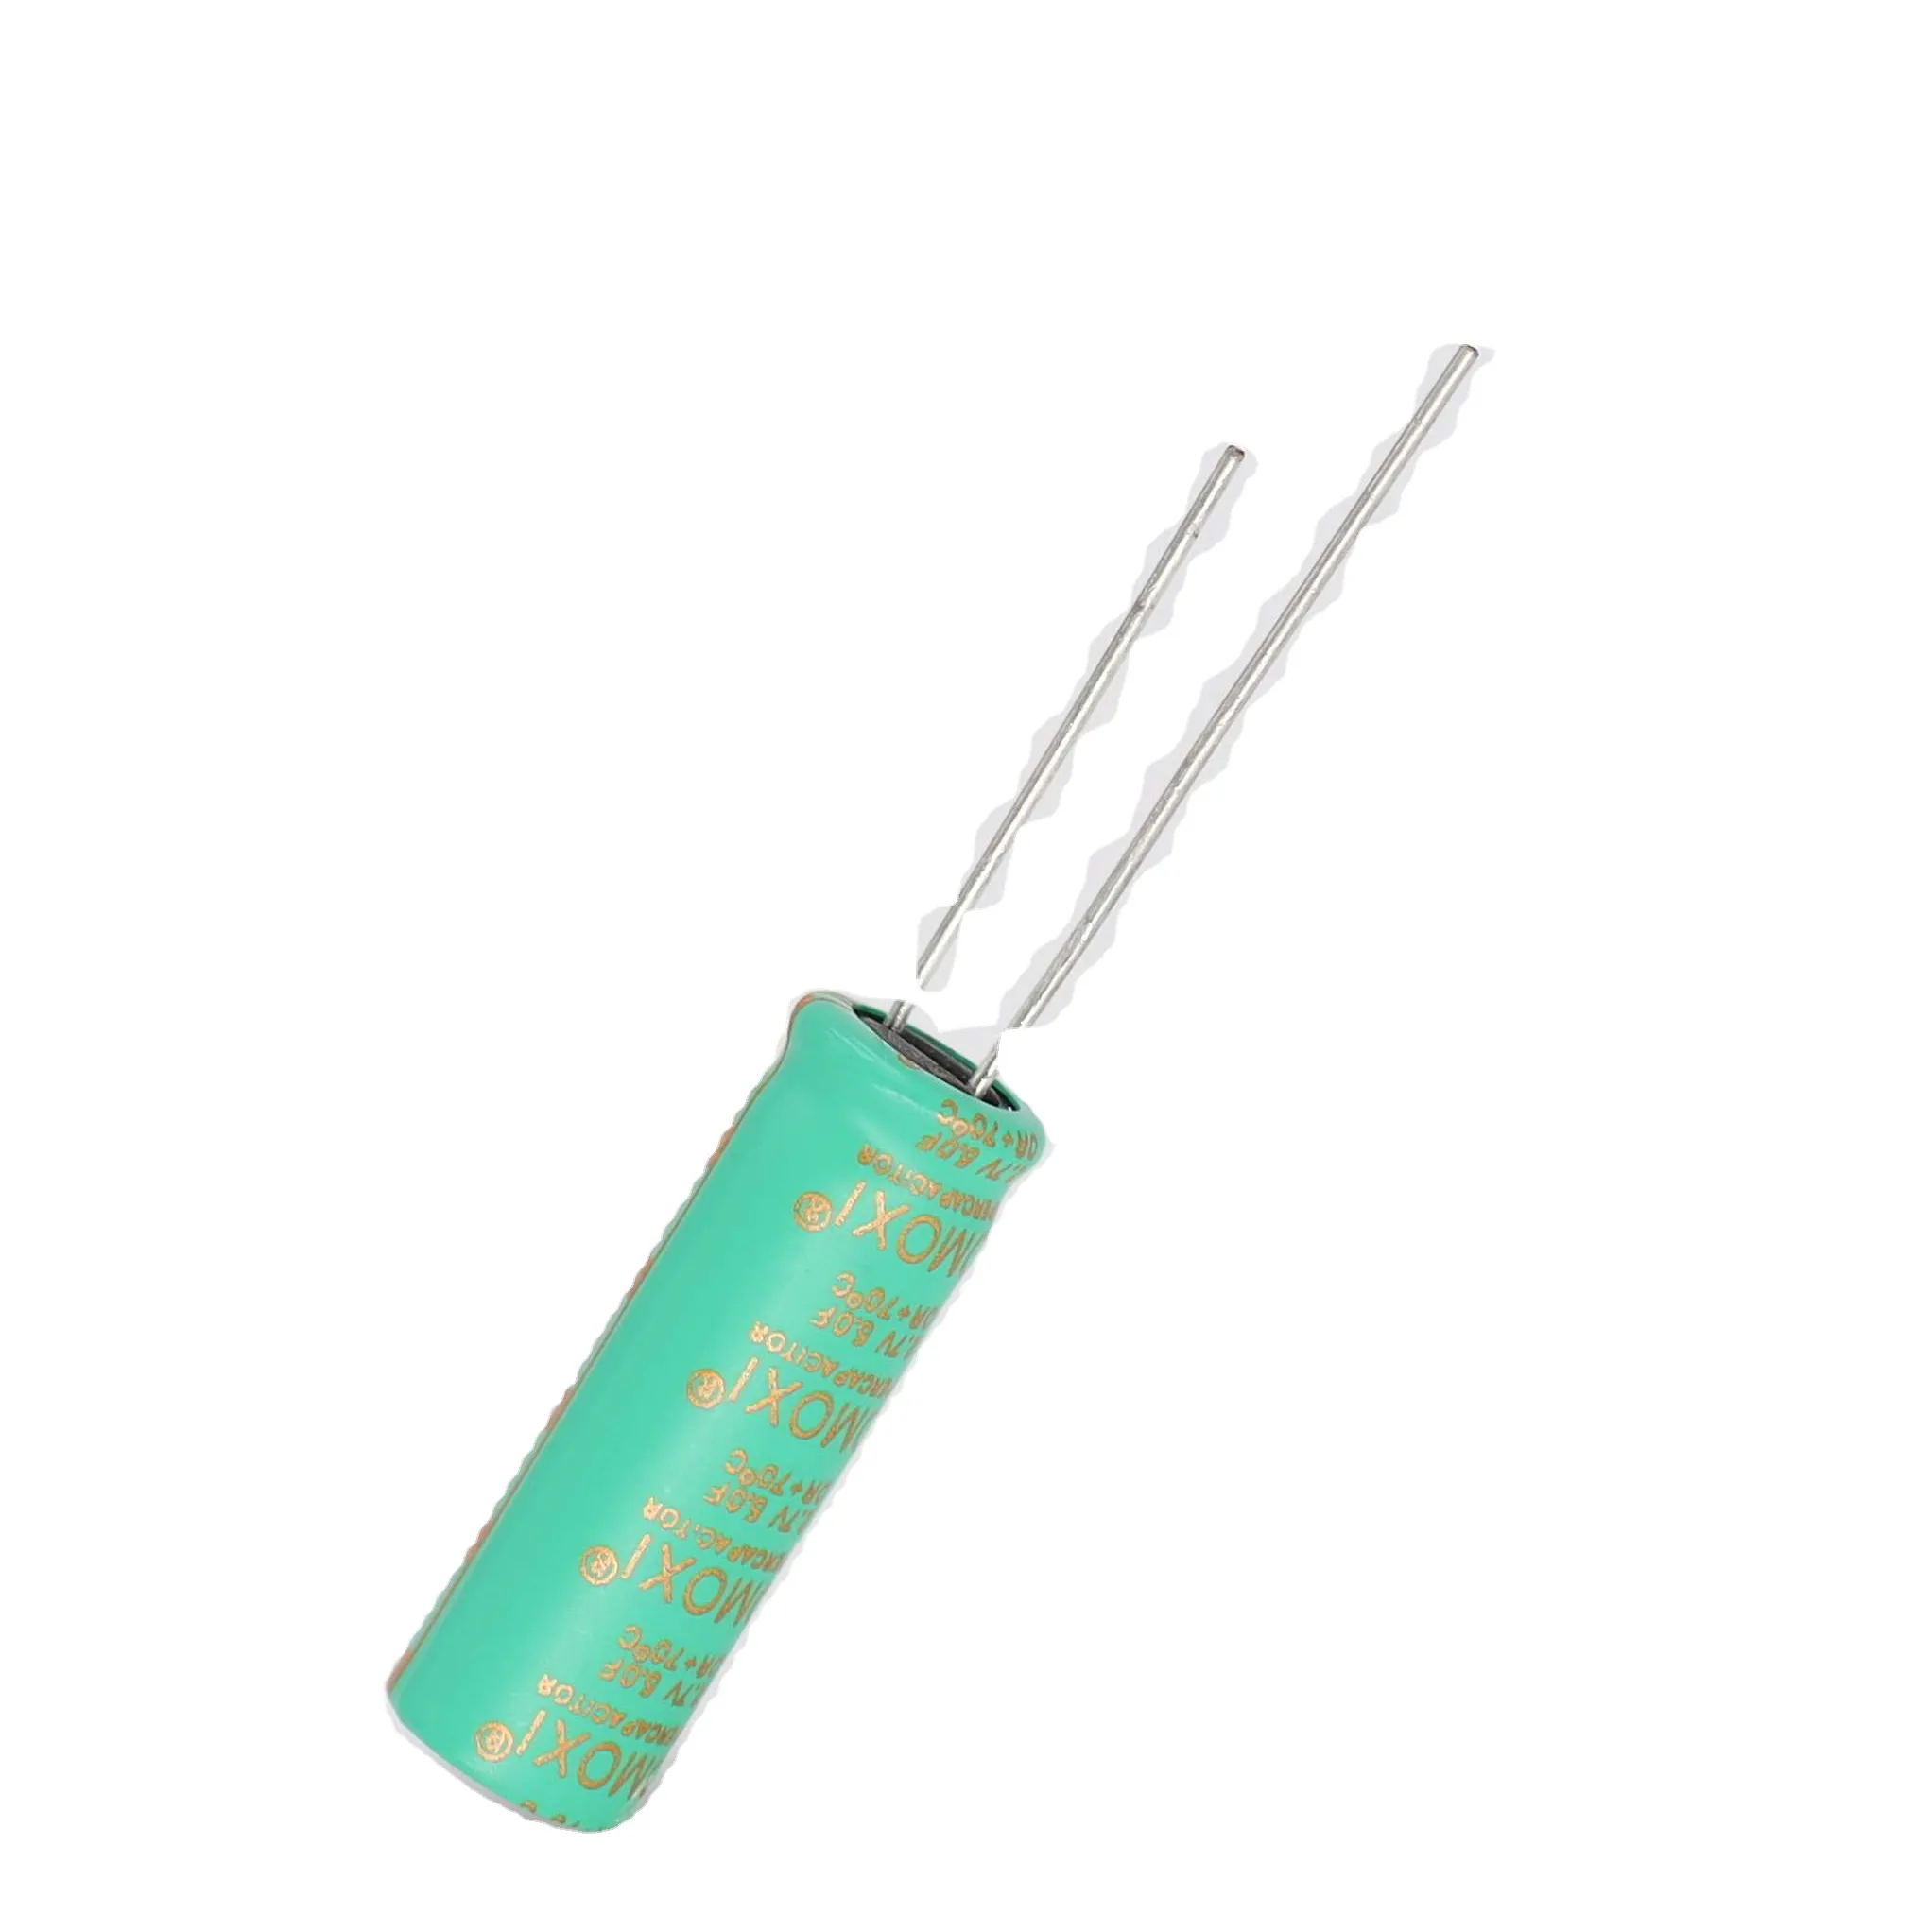 Audio and video amplifier super capacitor Negative ion generation super capacitor wound supercapacitor2.7V 5.0F